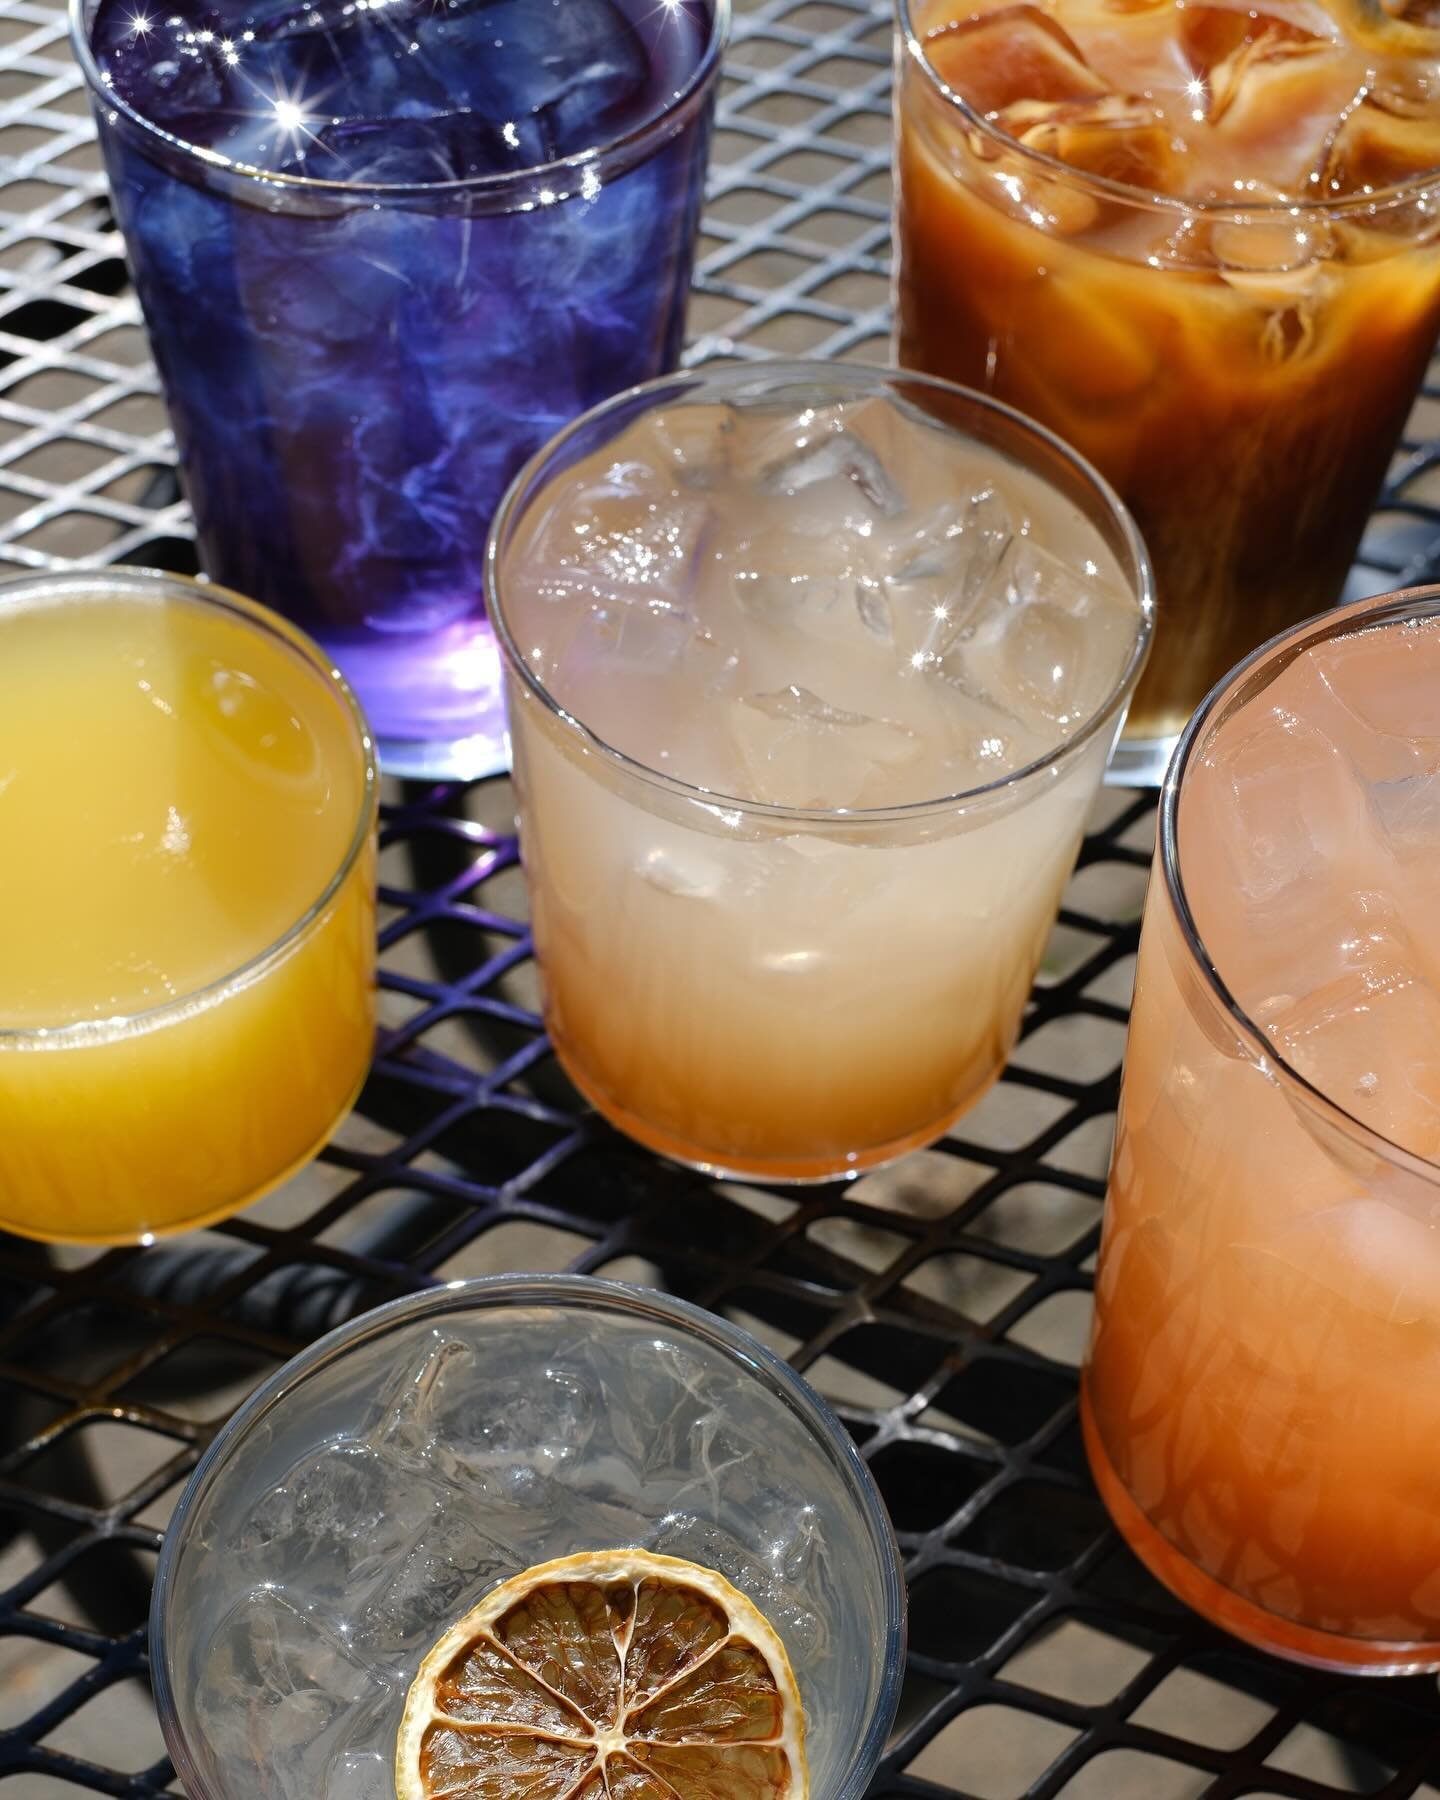 Ice cold beverages. You want&rsquo;m and we got&rsquo;m!! 
//
Blue Jasmine Iced Tea
Regina blend Cold Brew with oat milk 
Adernats Cava Mimosa
Blood Orange and Rhubarb Shrub
Strawberry Lemonade 
Moxie Mule Vermouth Spritz